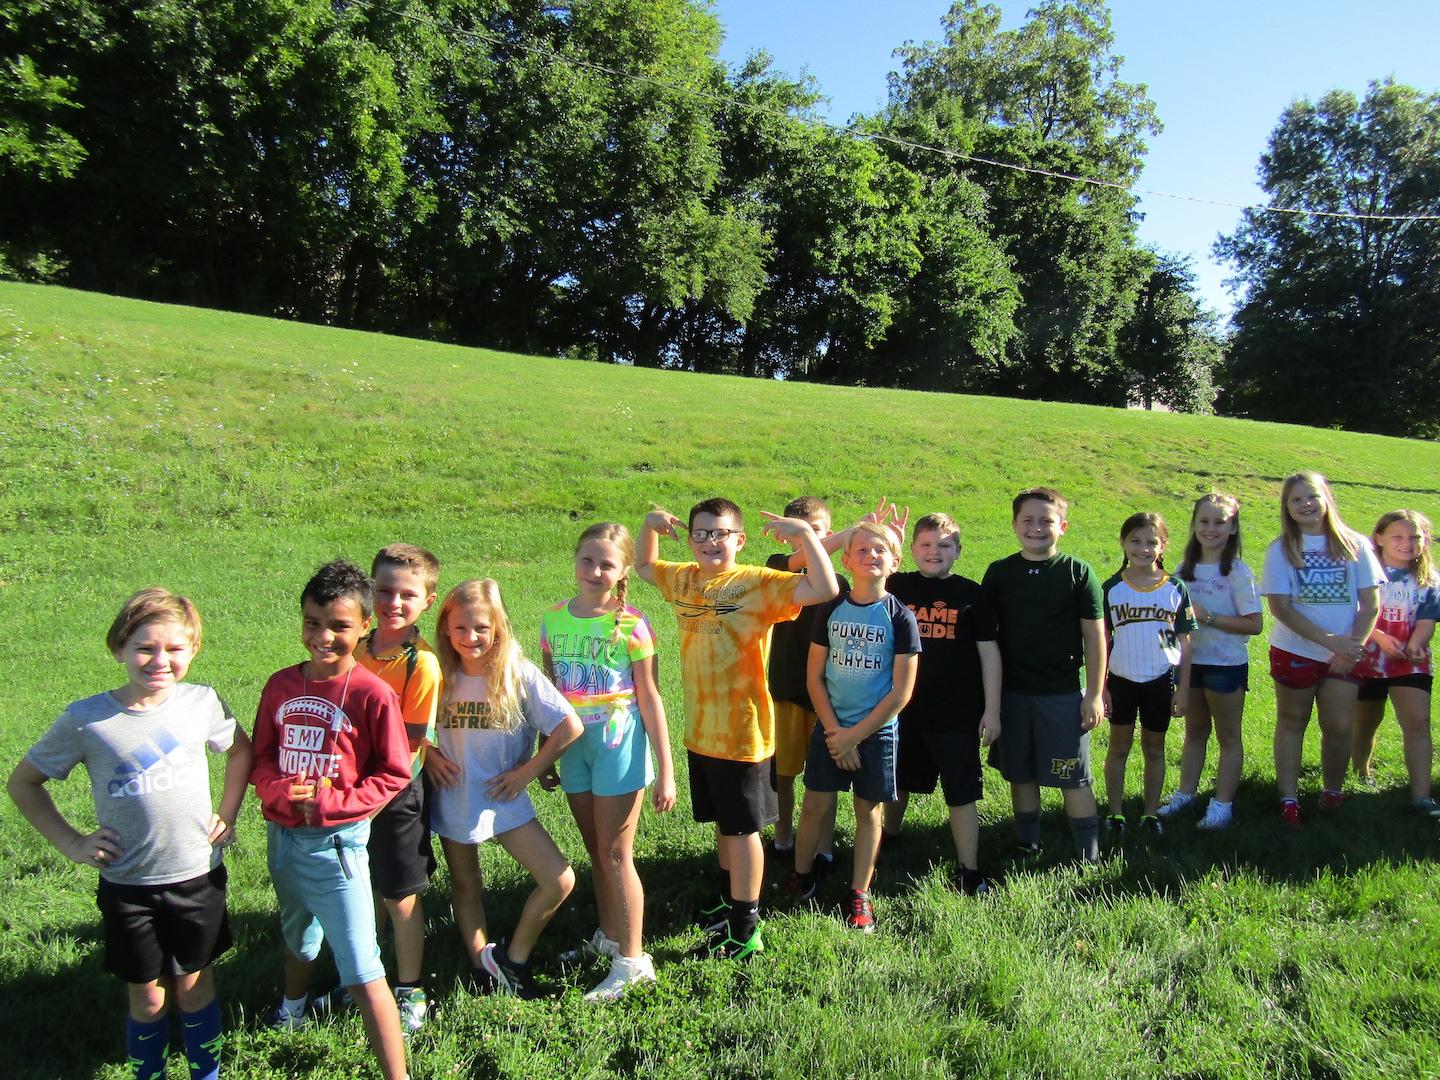 These third-graders enjoyed the outdoor games